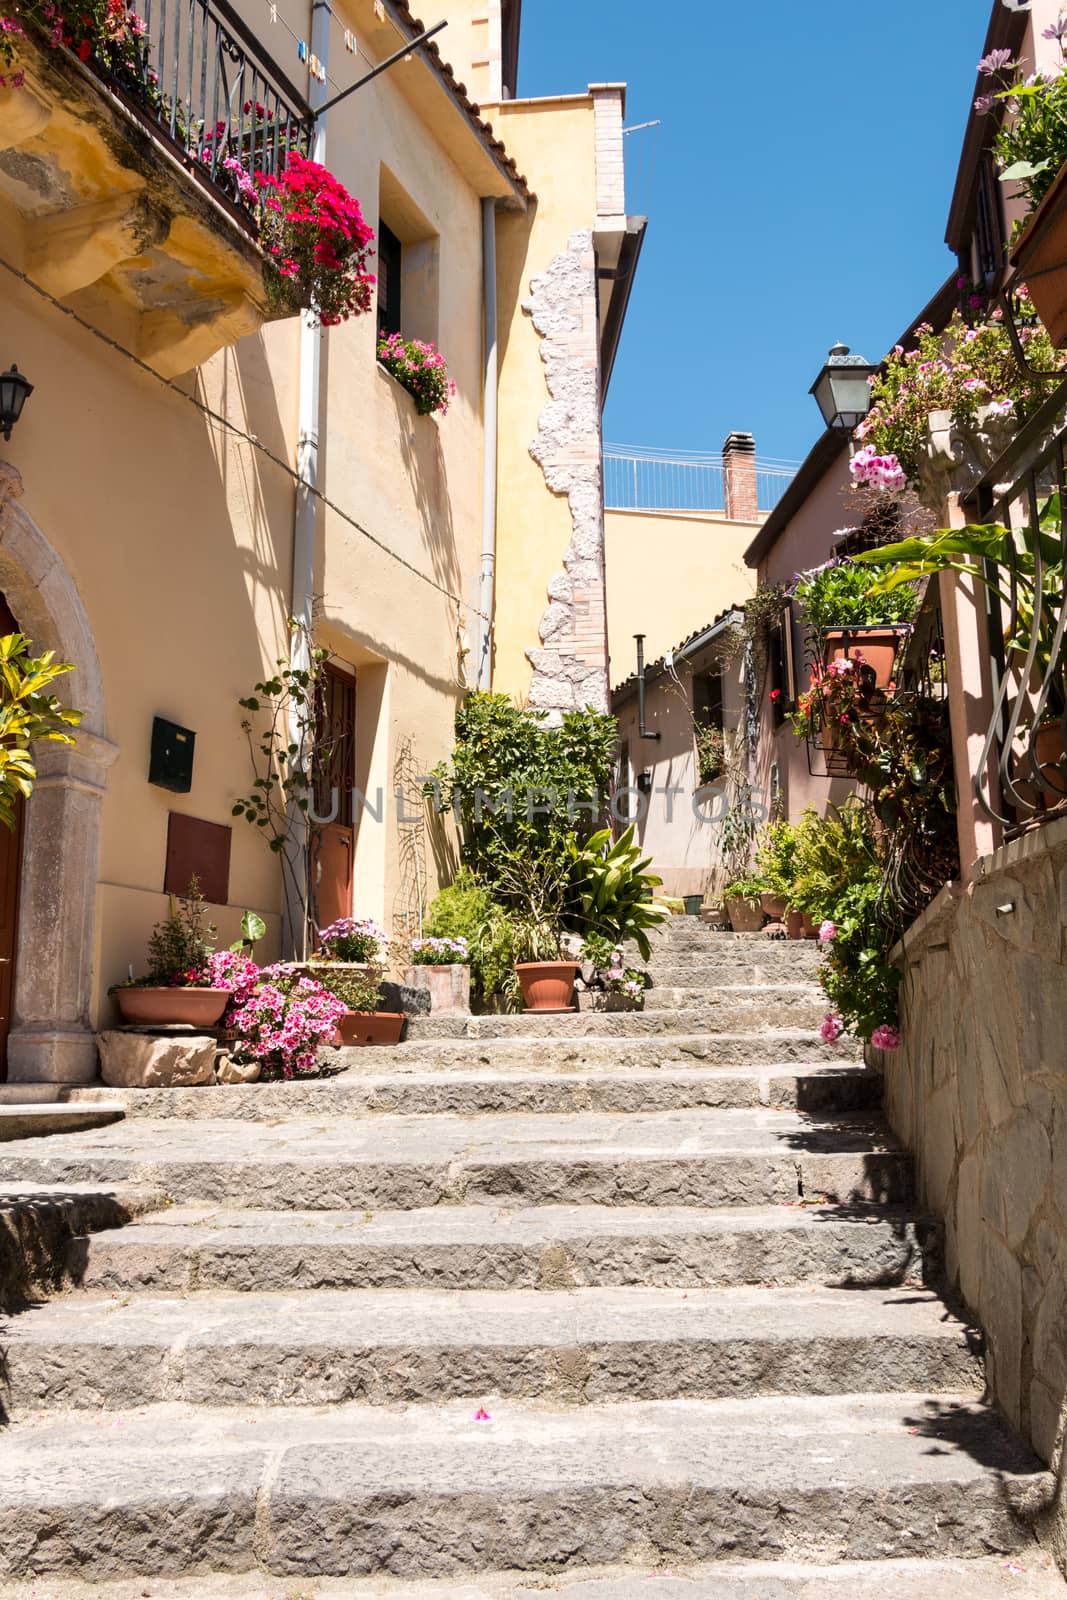 Stairs and flowers in the village